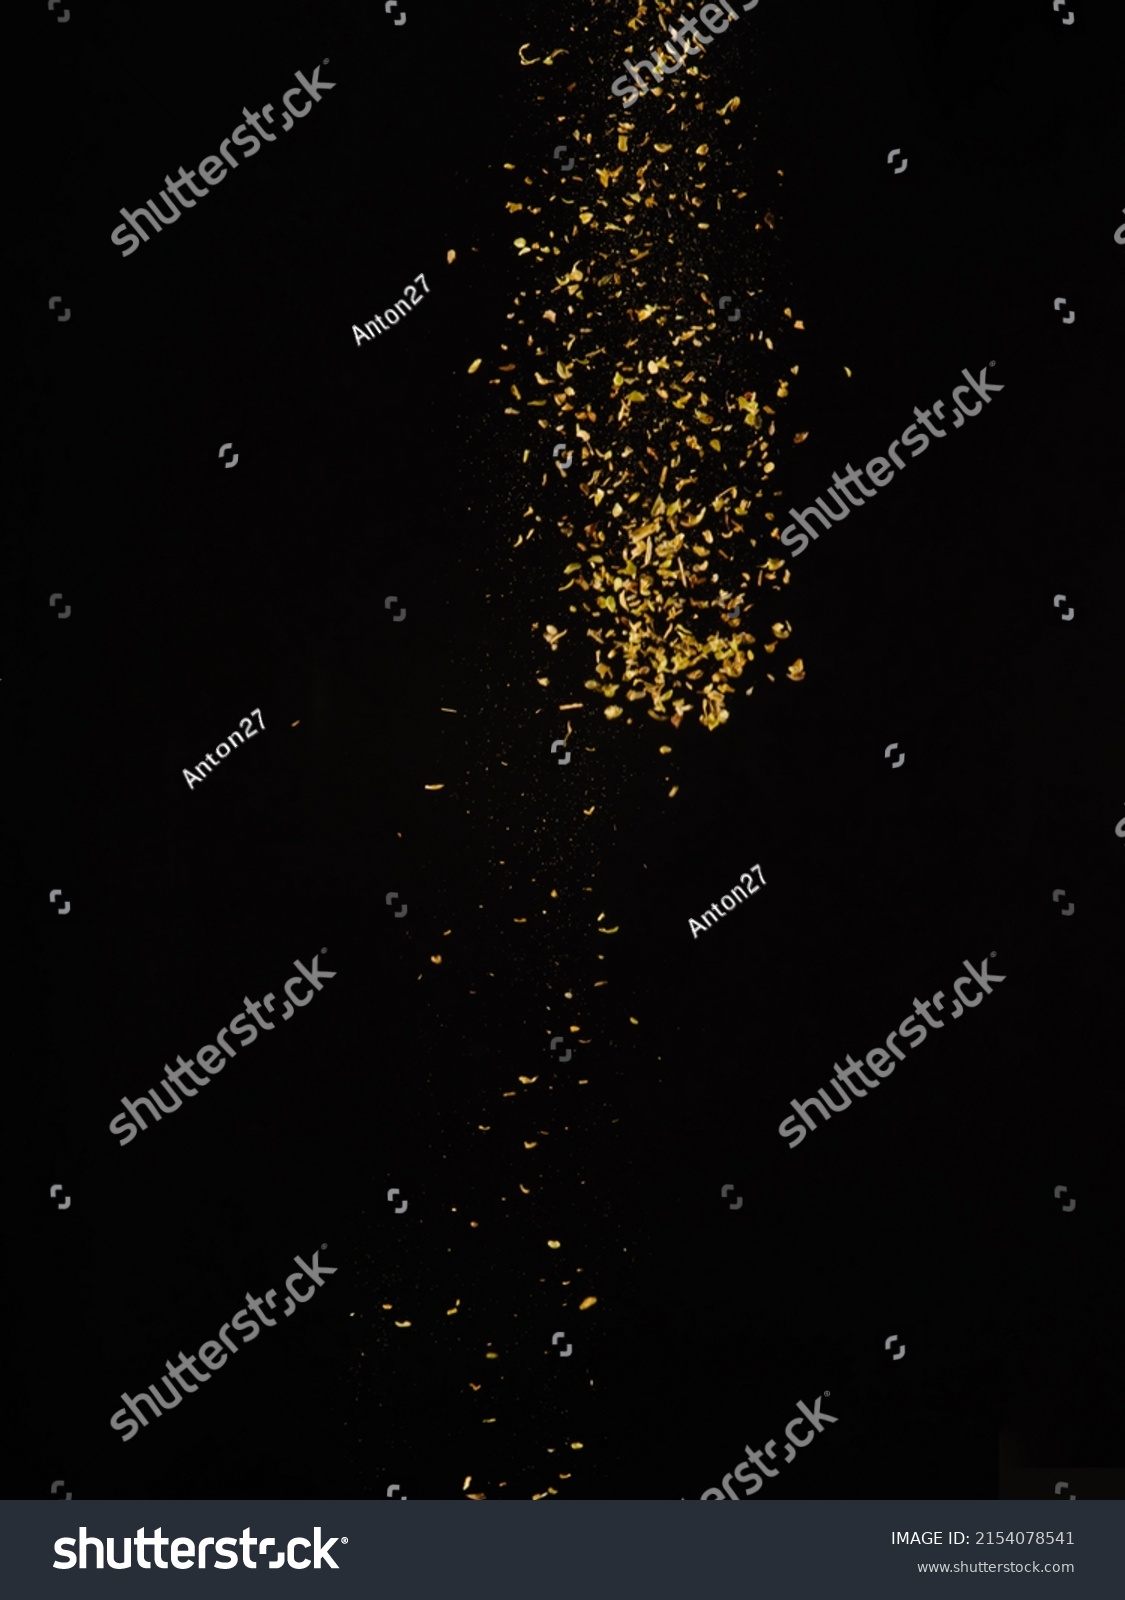 Aromatic spices in free flight on a black background. The concept is spices, seasonings, aromatic additives. Recipes for restaurant and home cooking. Minimalism. Abstraction. #2154078541